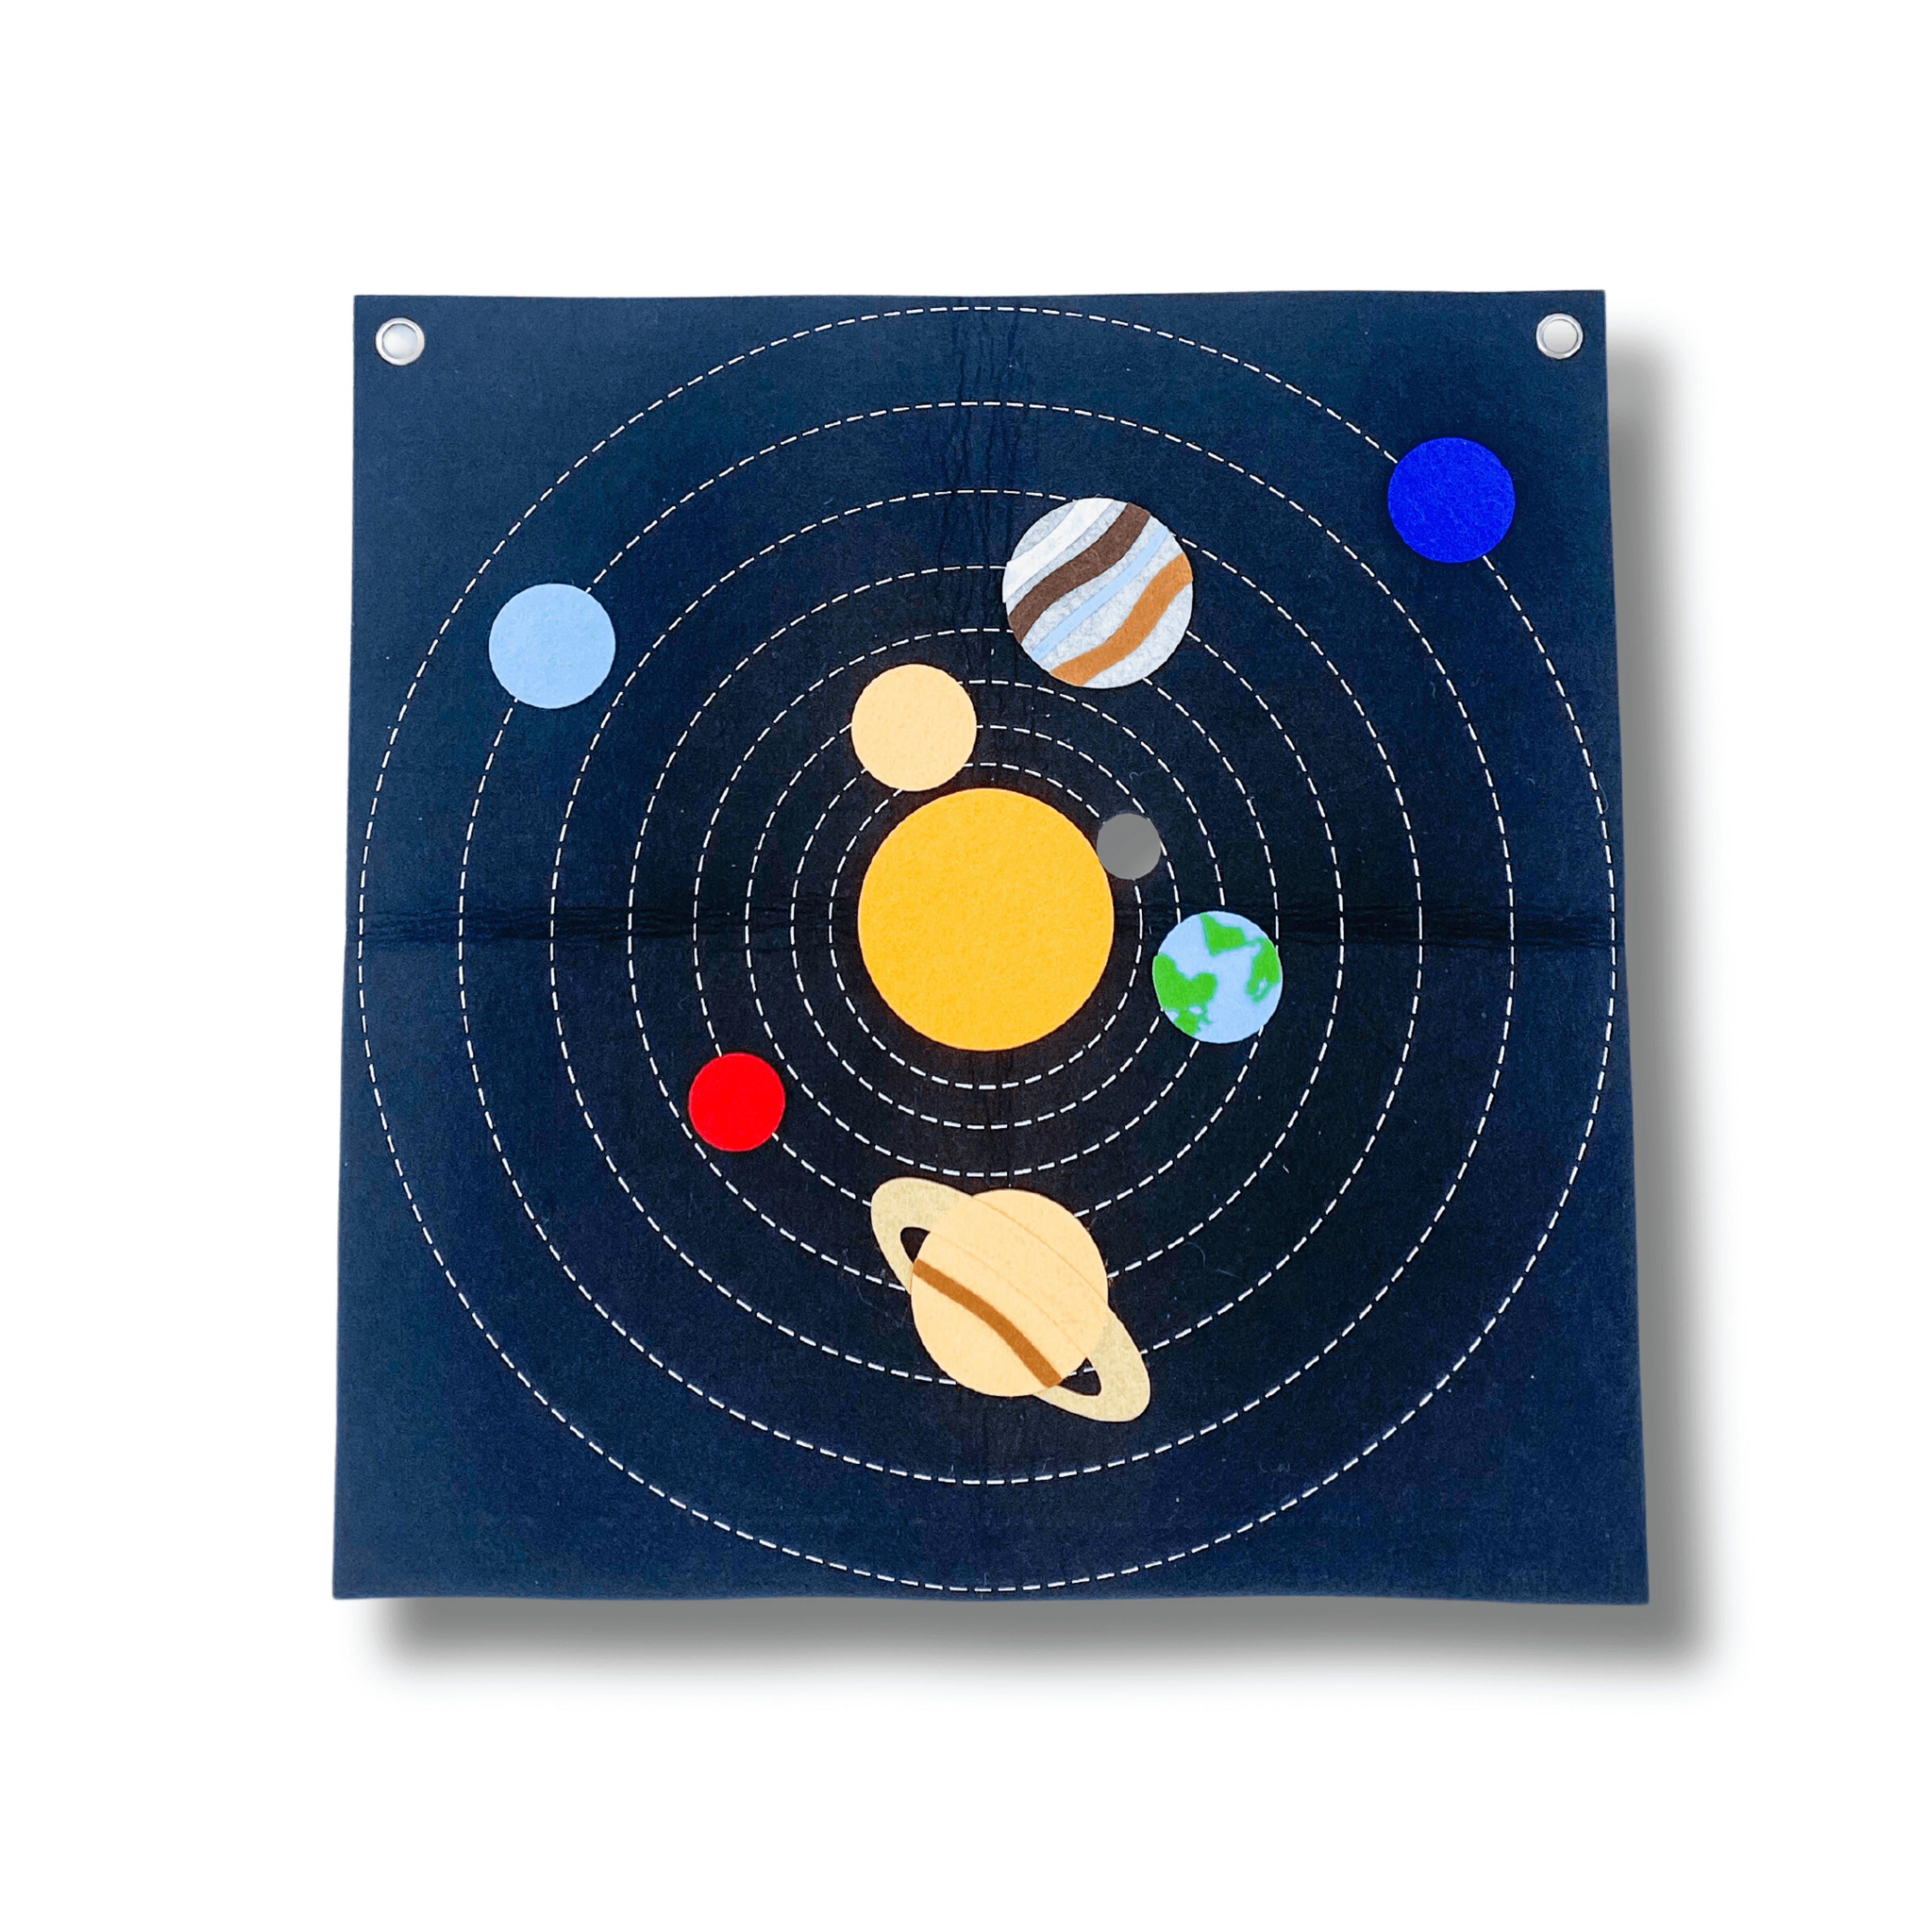 Custom-created planet felt mat for kids to learn about the planets. Children can place the planets on the mat, either hanging it up or laying it on the floor. Ideal for play-based learning about the solar system and engaging, hands-on fun.